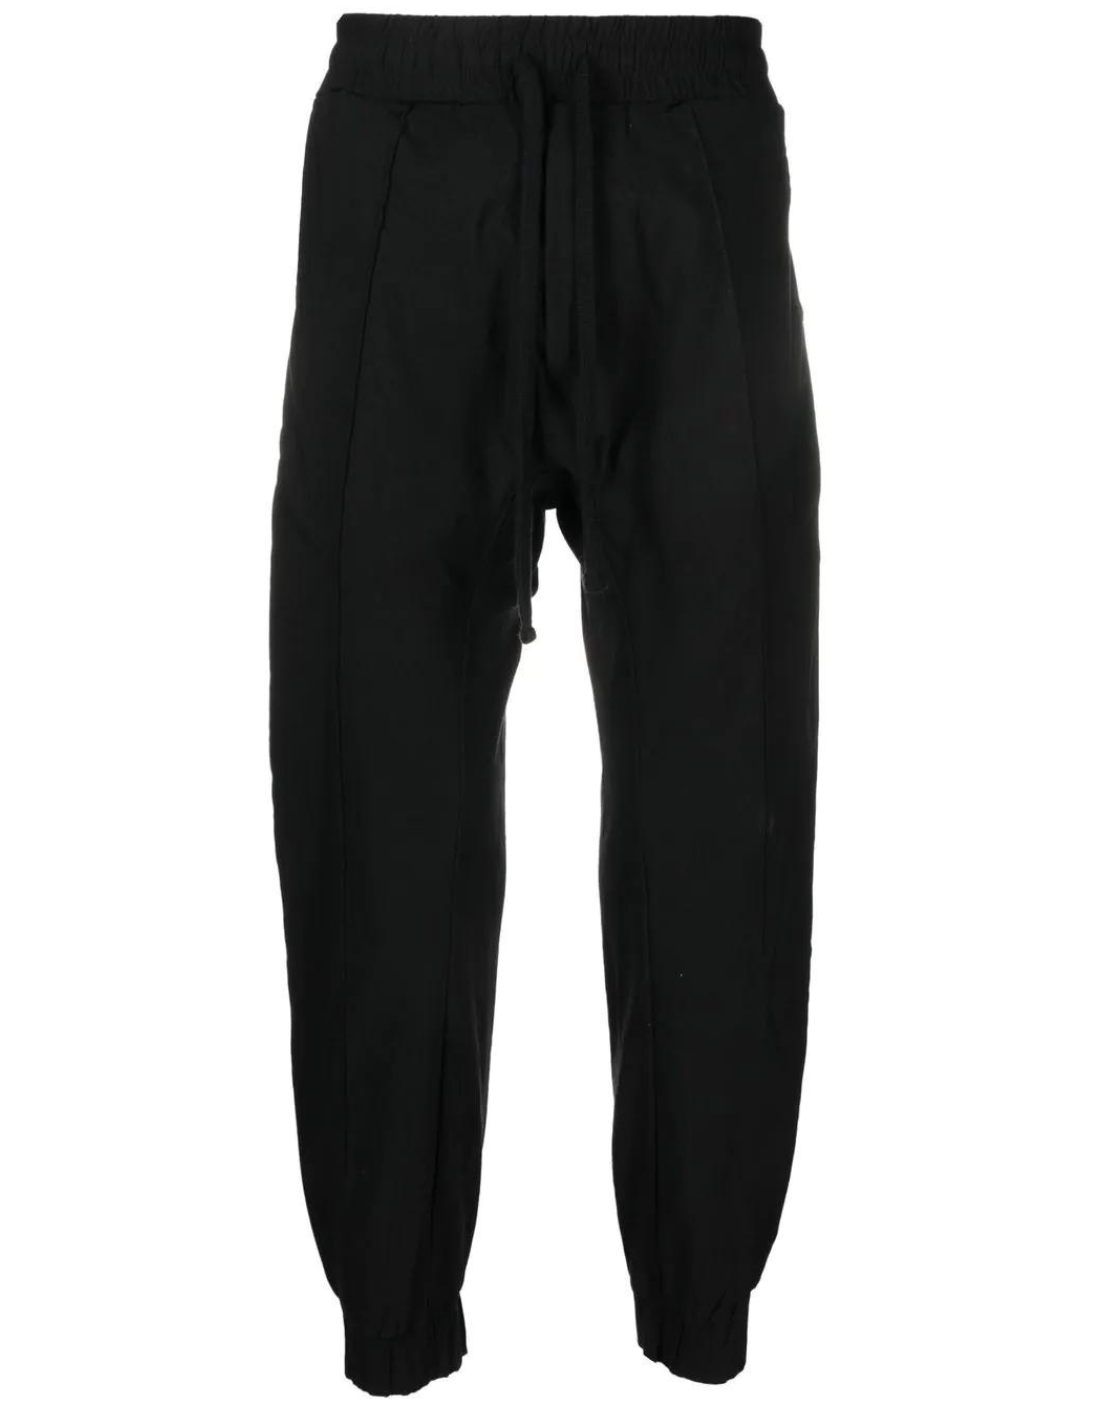 Buy Green Track Pants for Women by Marks & Spencer Online | Ajio.com